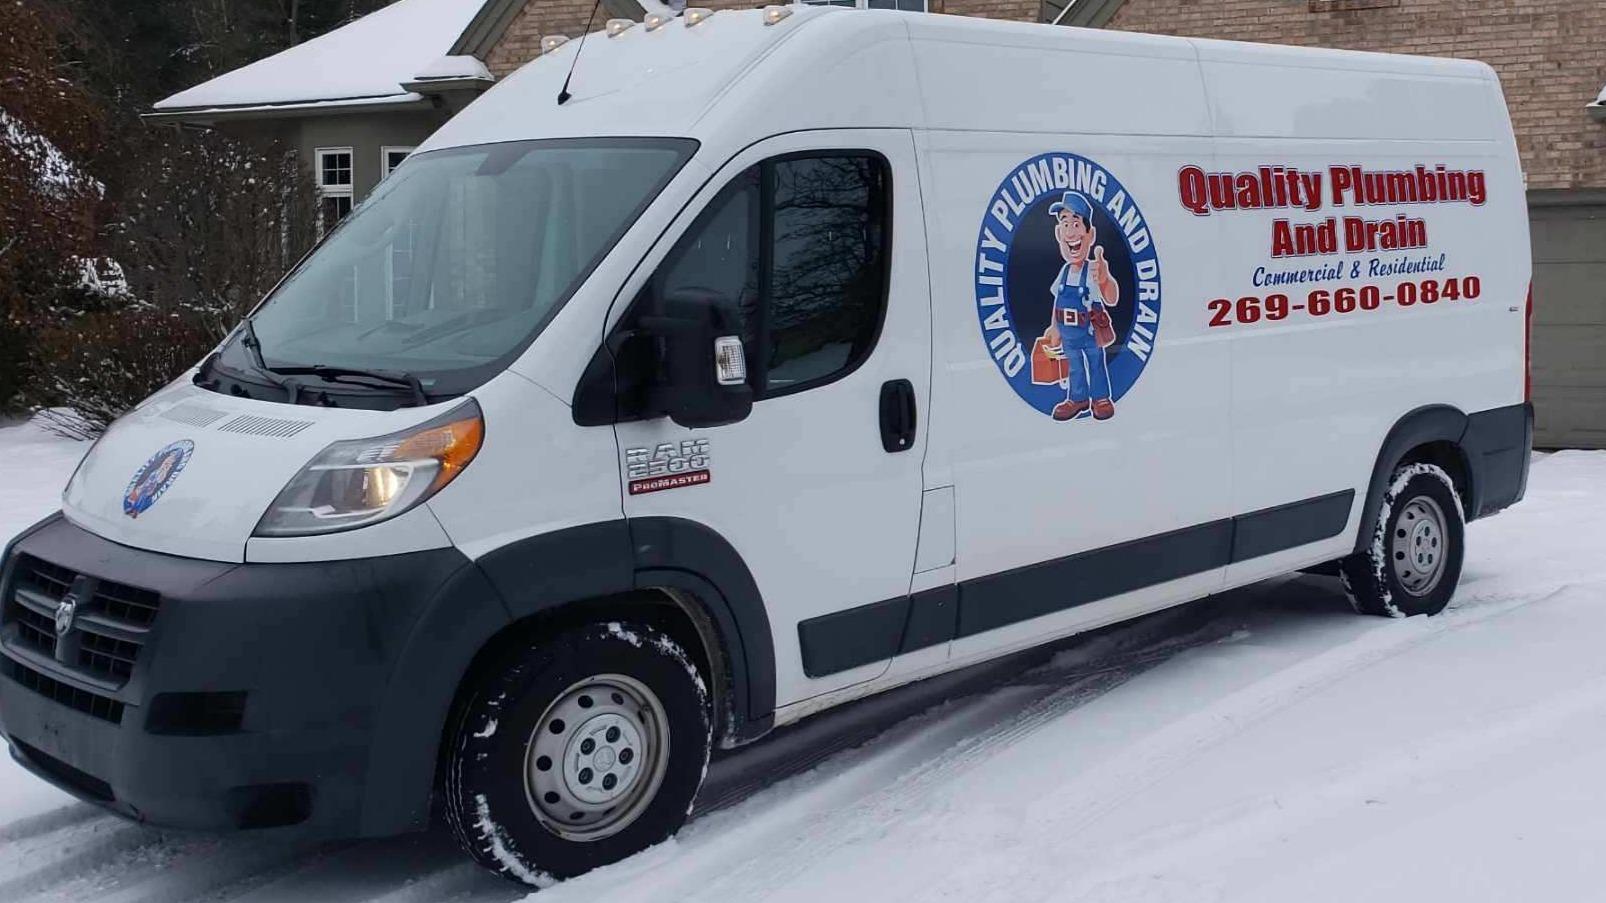 Quality Plumbing & Drain: Your Trusted Battle Creek, MI Residential Plumbing Experts